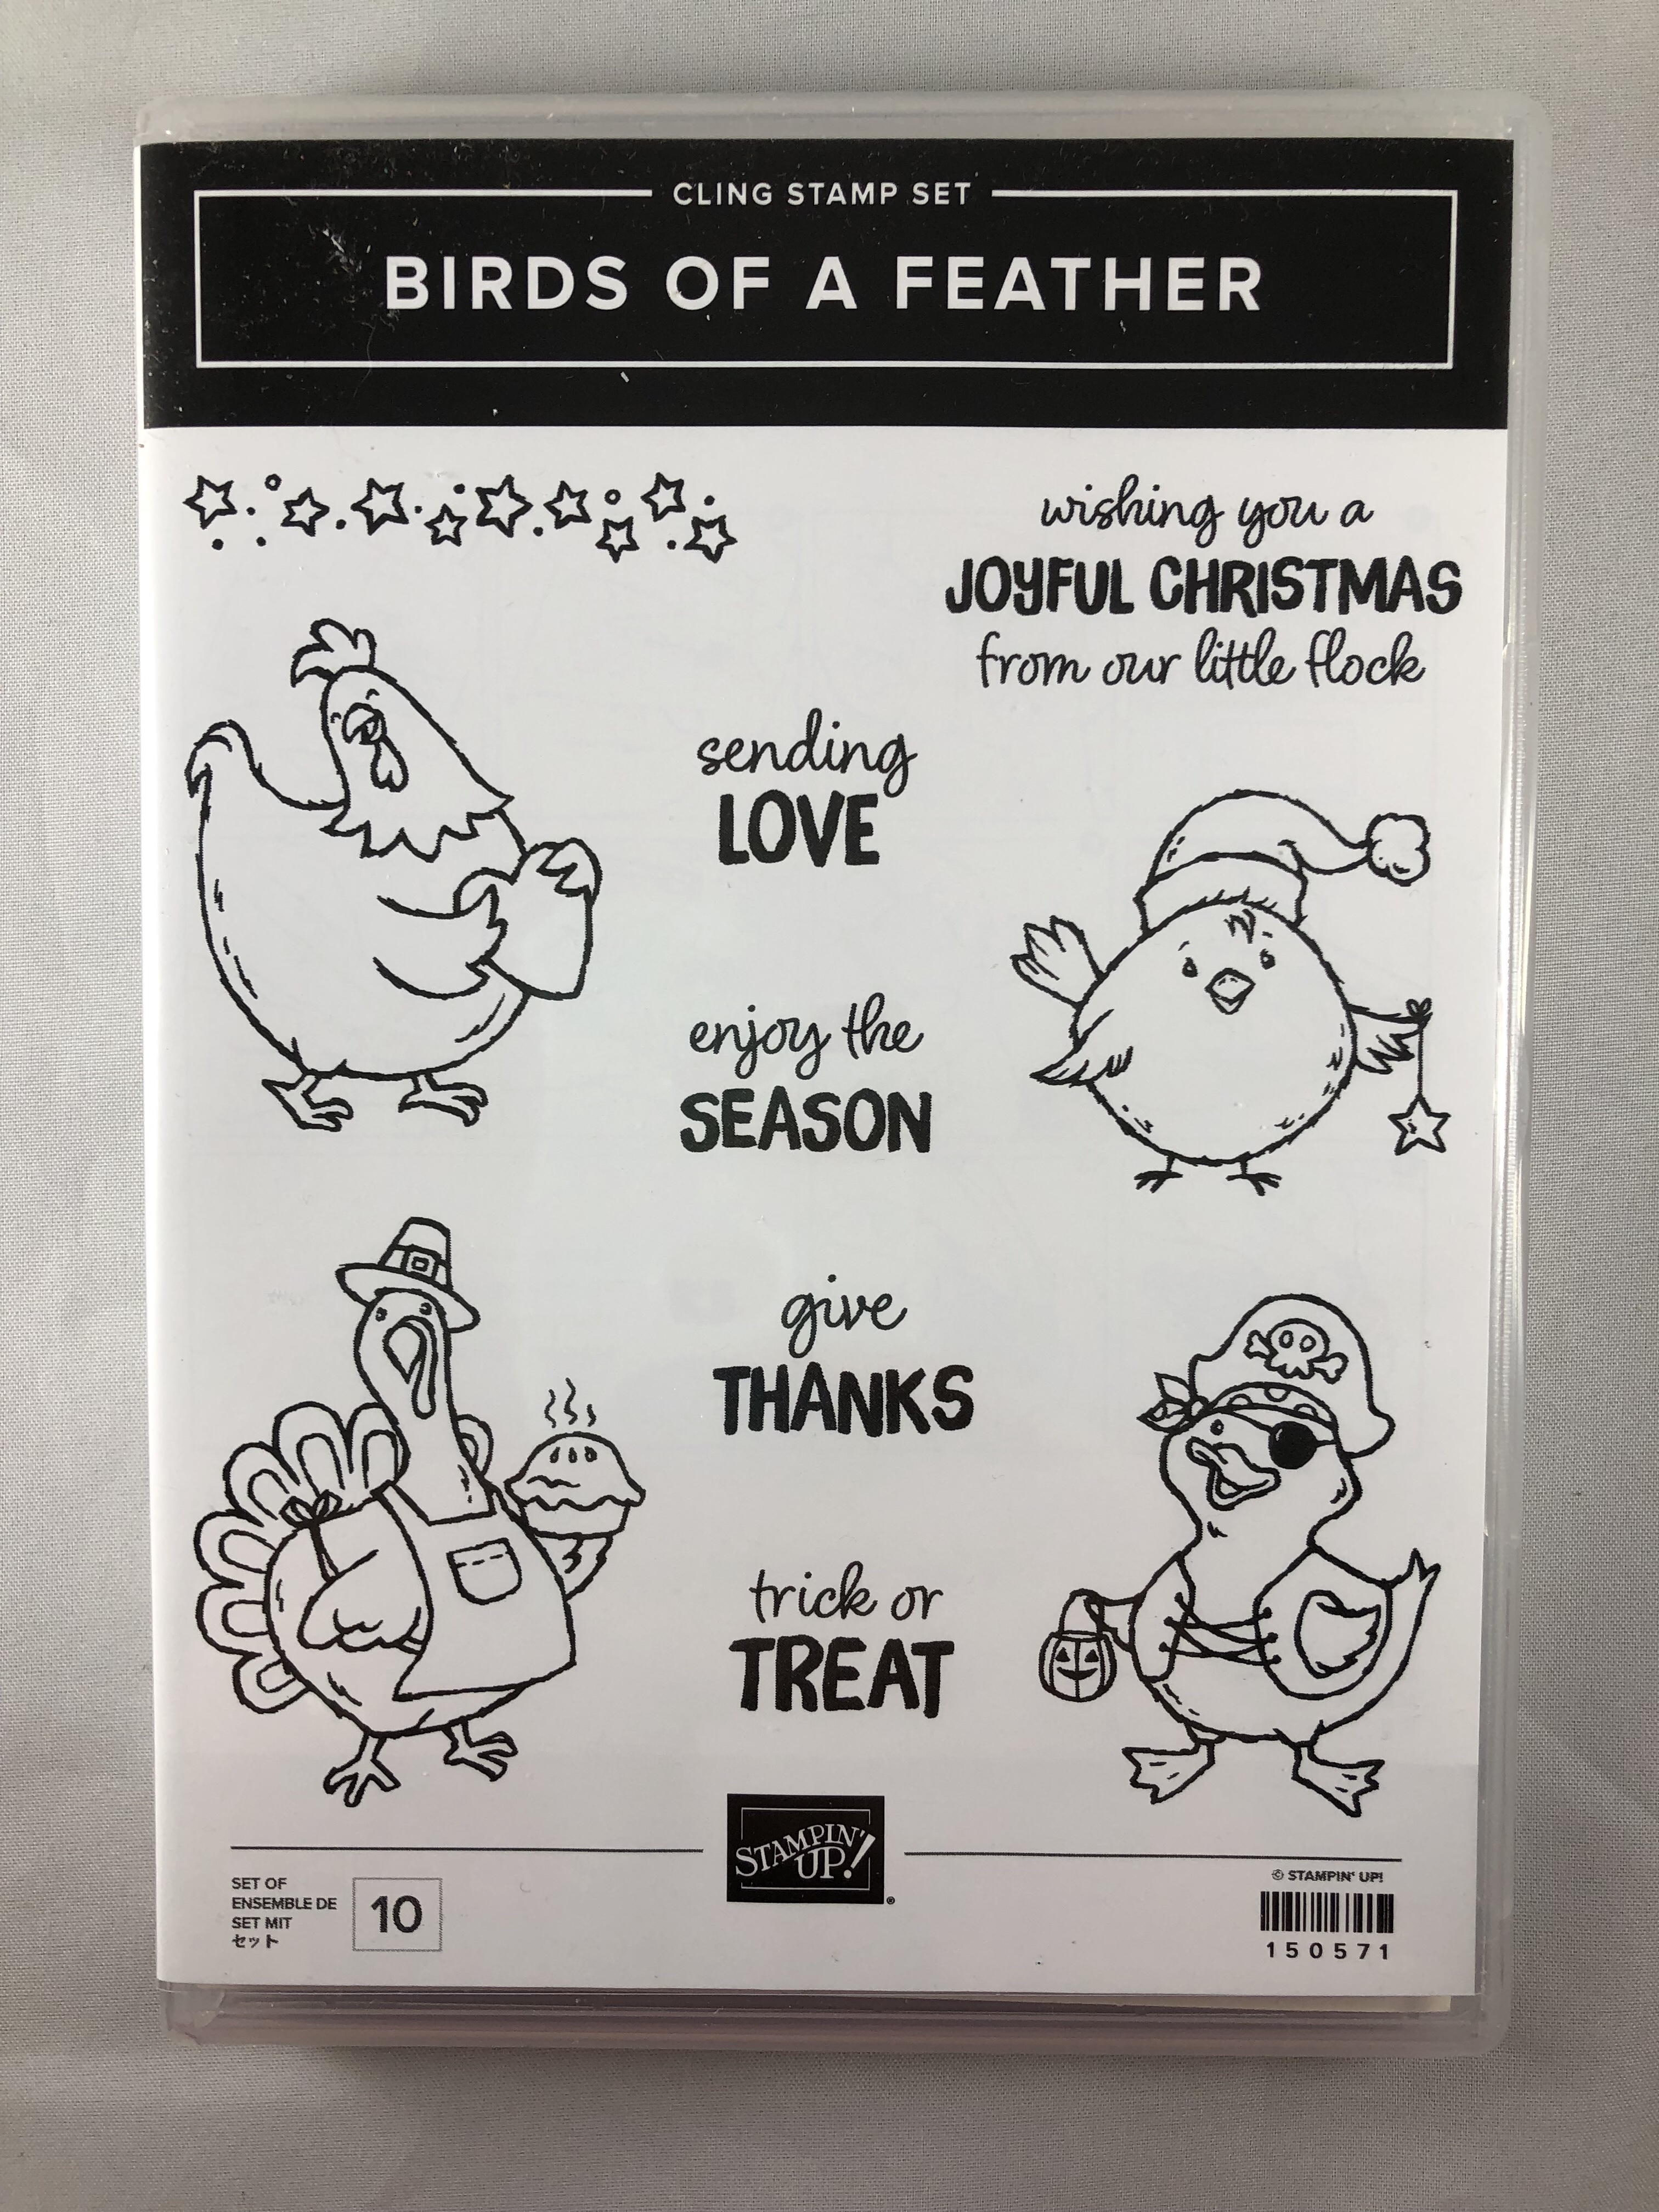 Stampin' Up! Birds of a Feather Stamp set from the 2019 Holiday catalog - to order visit juststampin.com - Jeanie Stark StampinUp